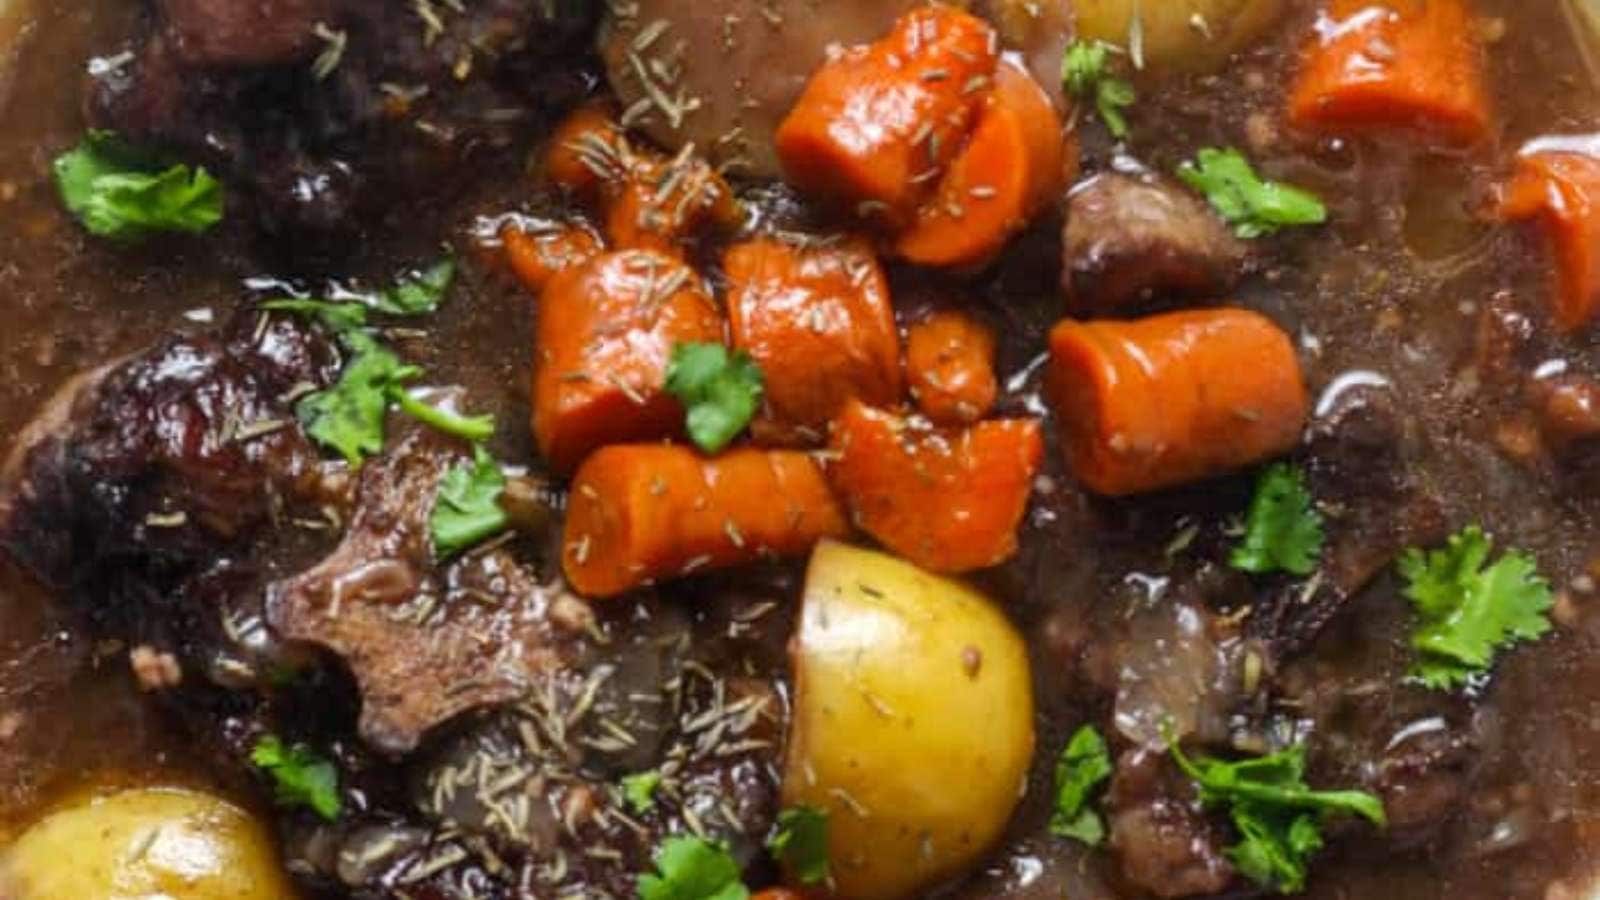 Beef chunks, potatoes, and carrots in a bowl.